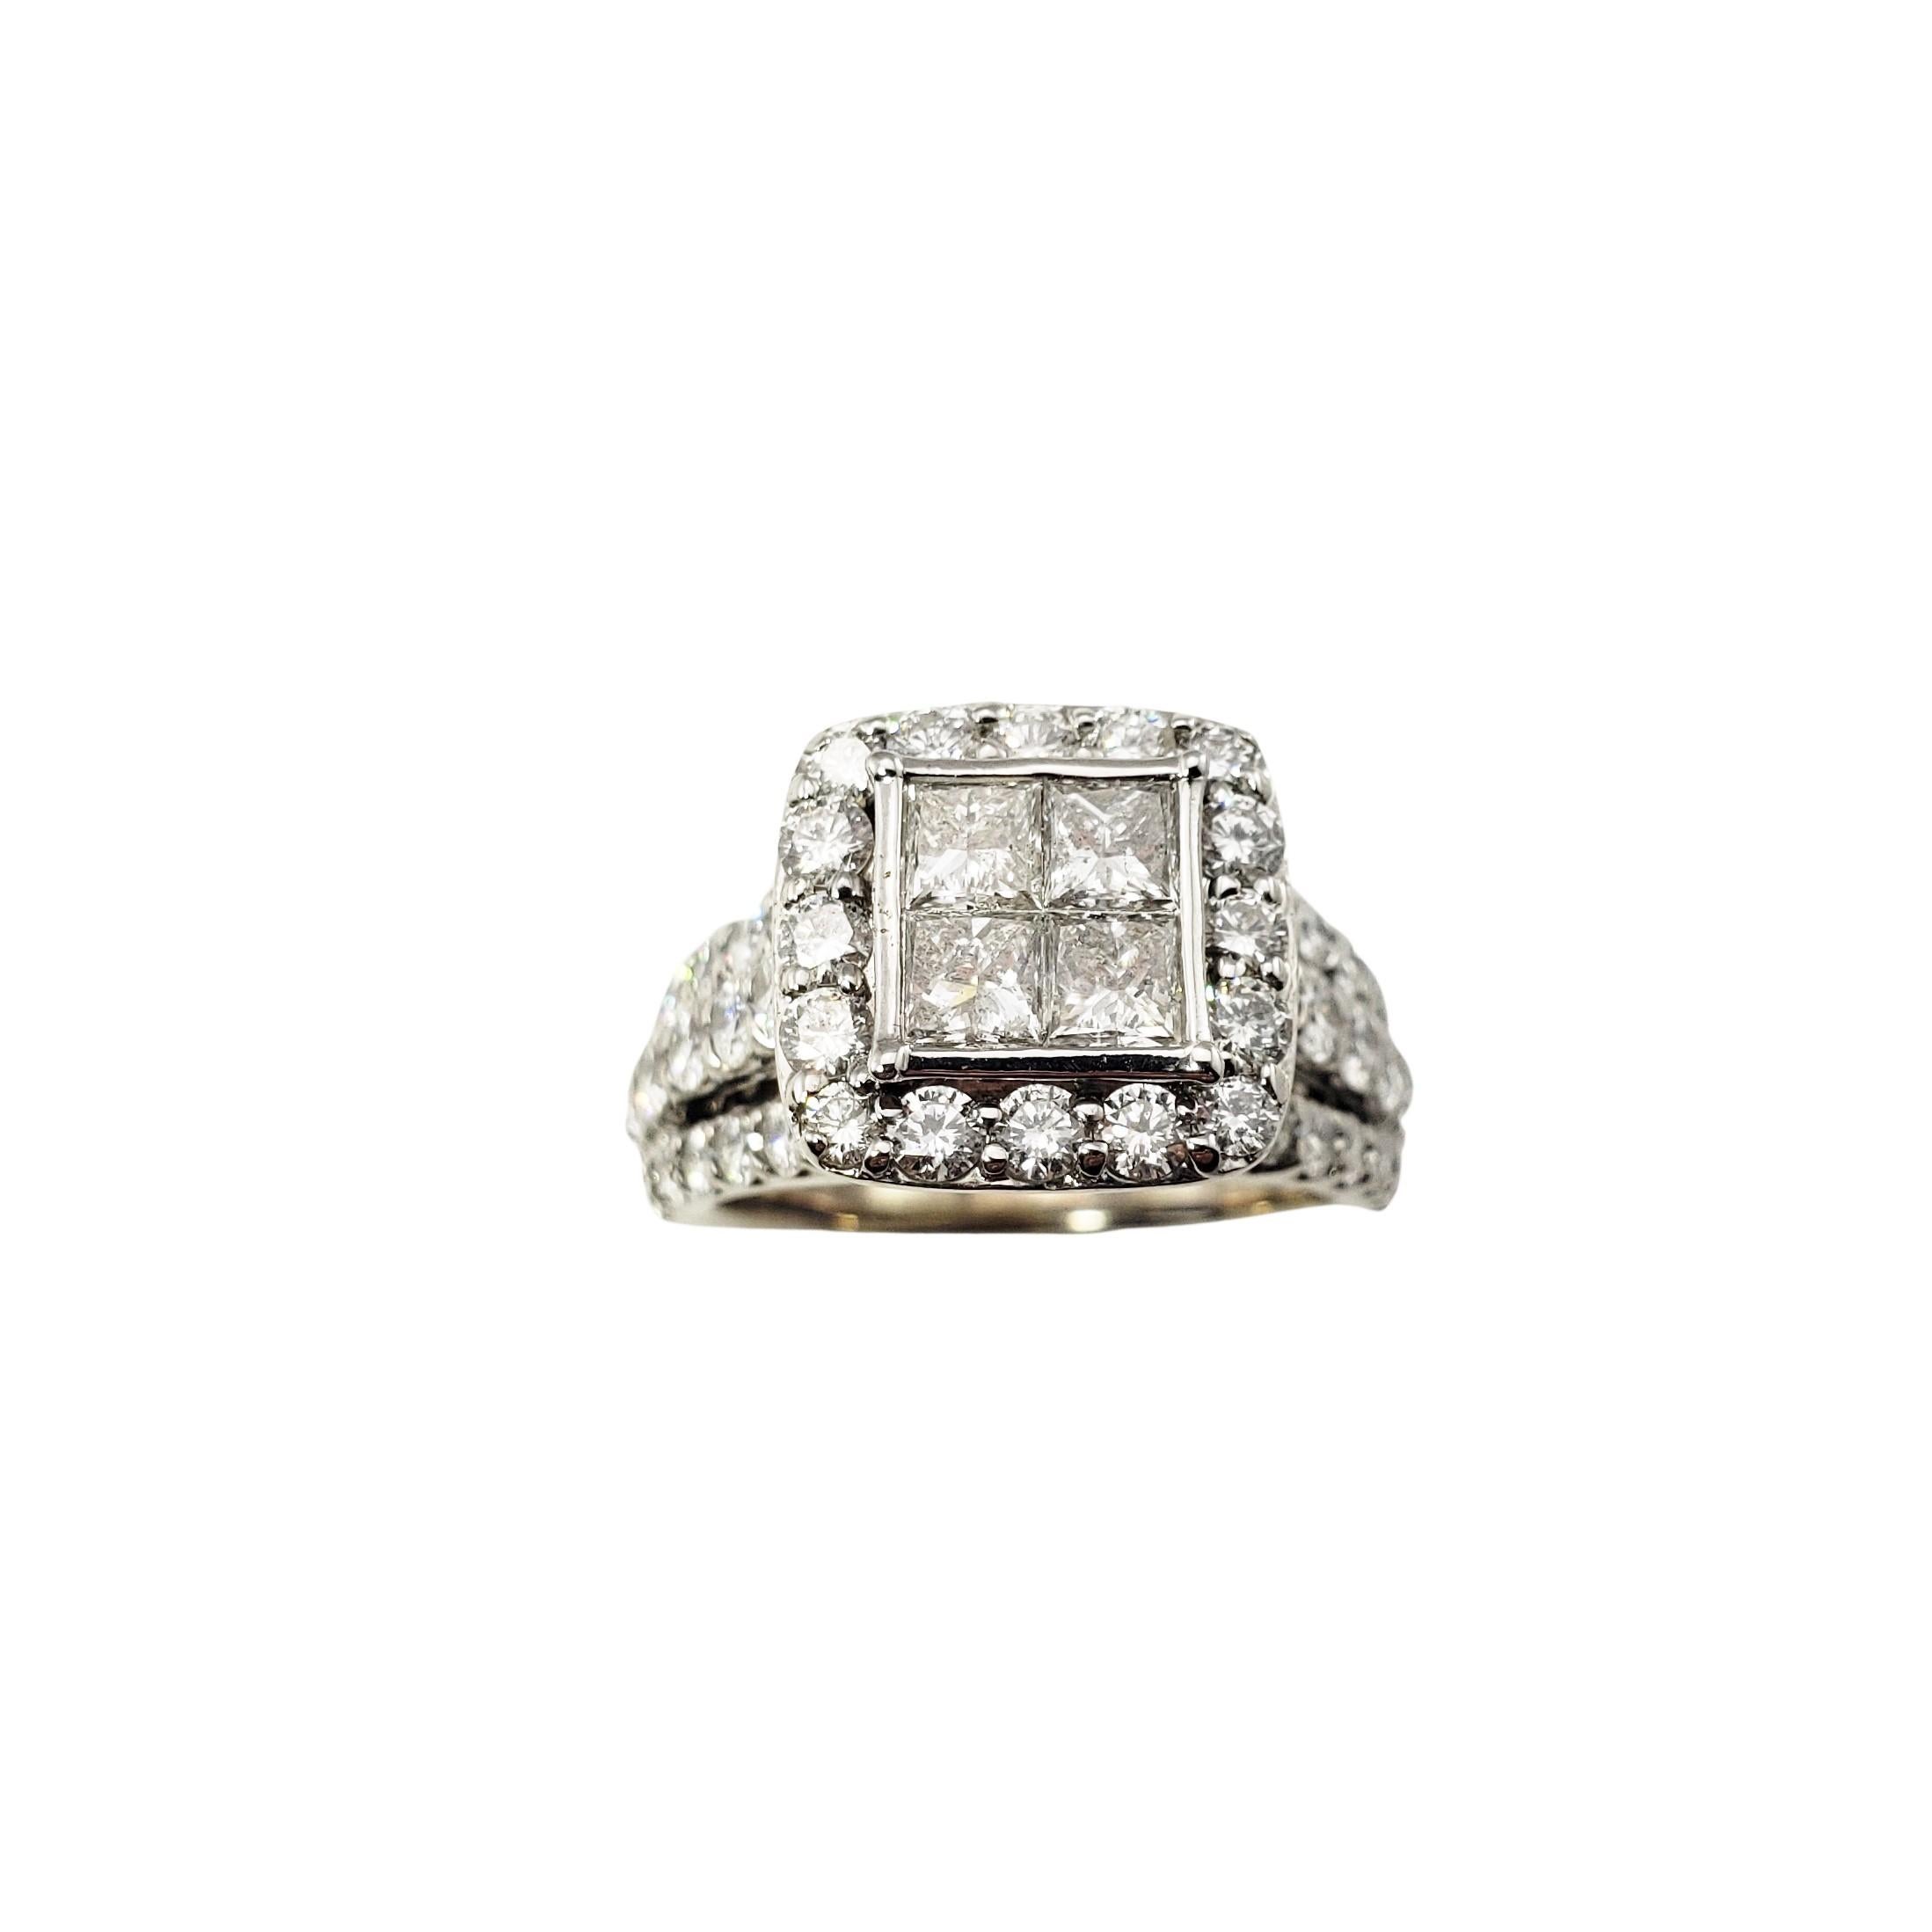 14 Karat White Gold and Diamond Ring Size 5.5-

This sparkling ring features four princess cut diamonds and 56 round brilliant cut diamonds set in beautifully detailed 14K white gold.  Width:  12 mm.  Height:  9 mm.  Shank:  2 mm.

Approximate total